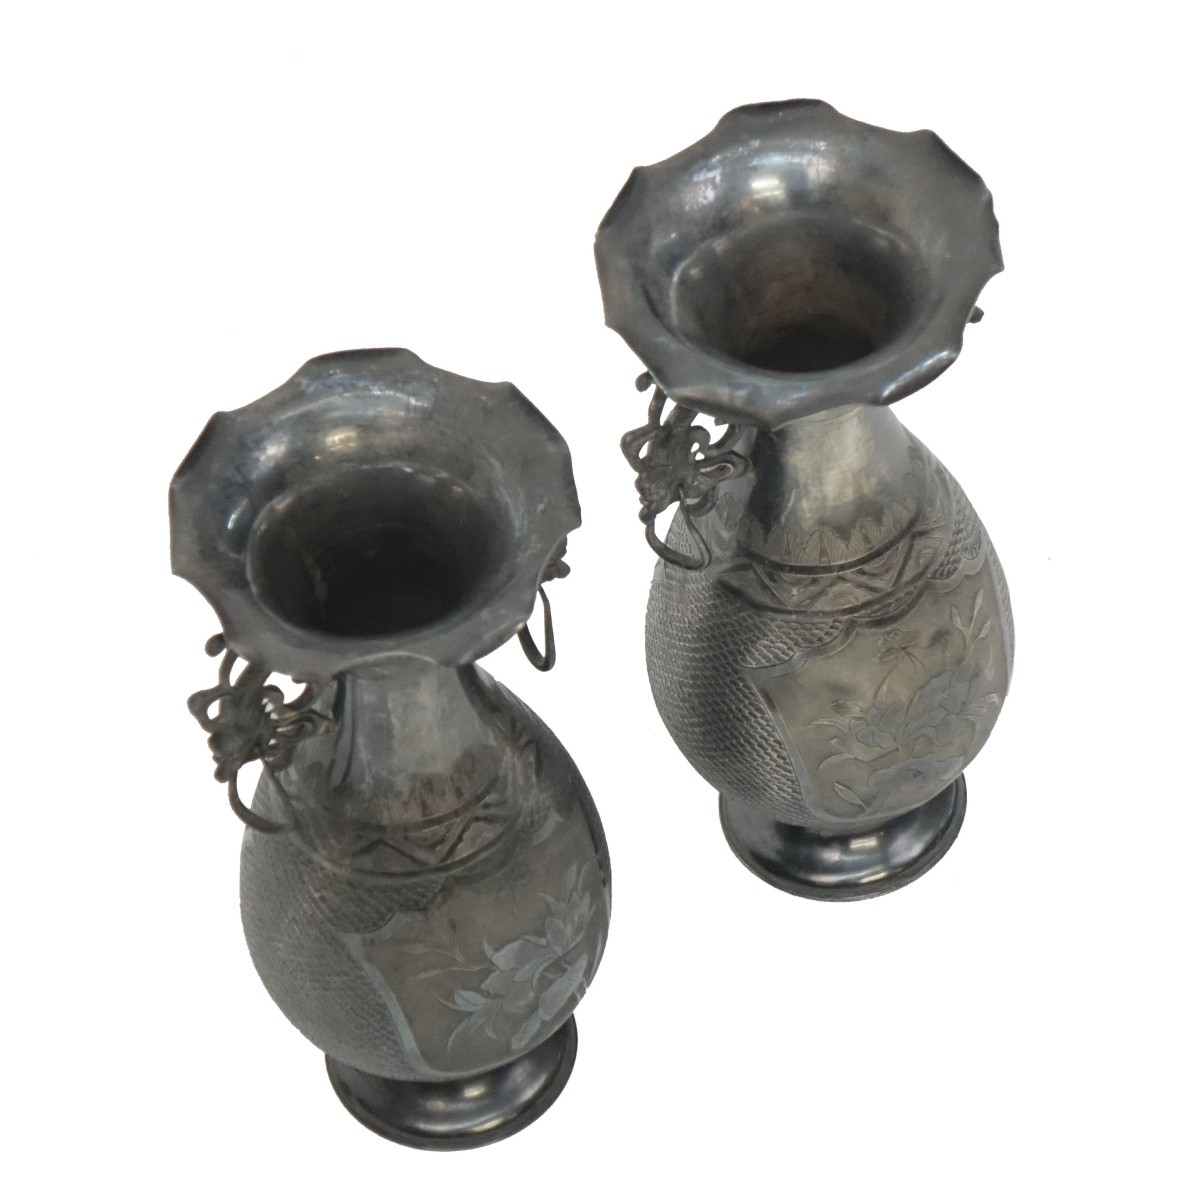 Chinese Silver Vases